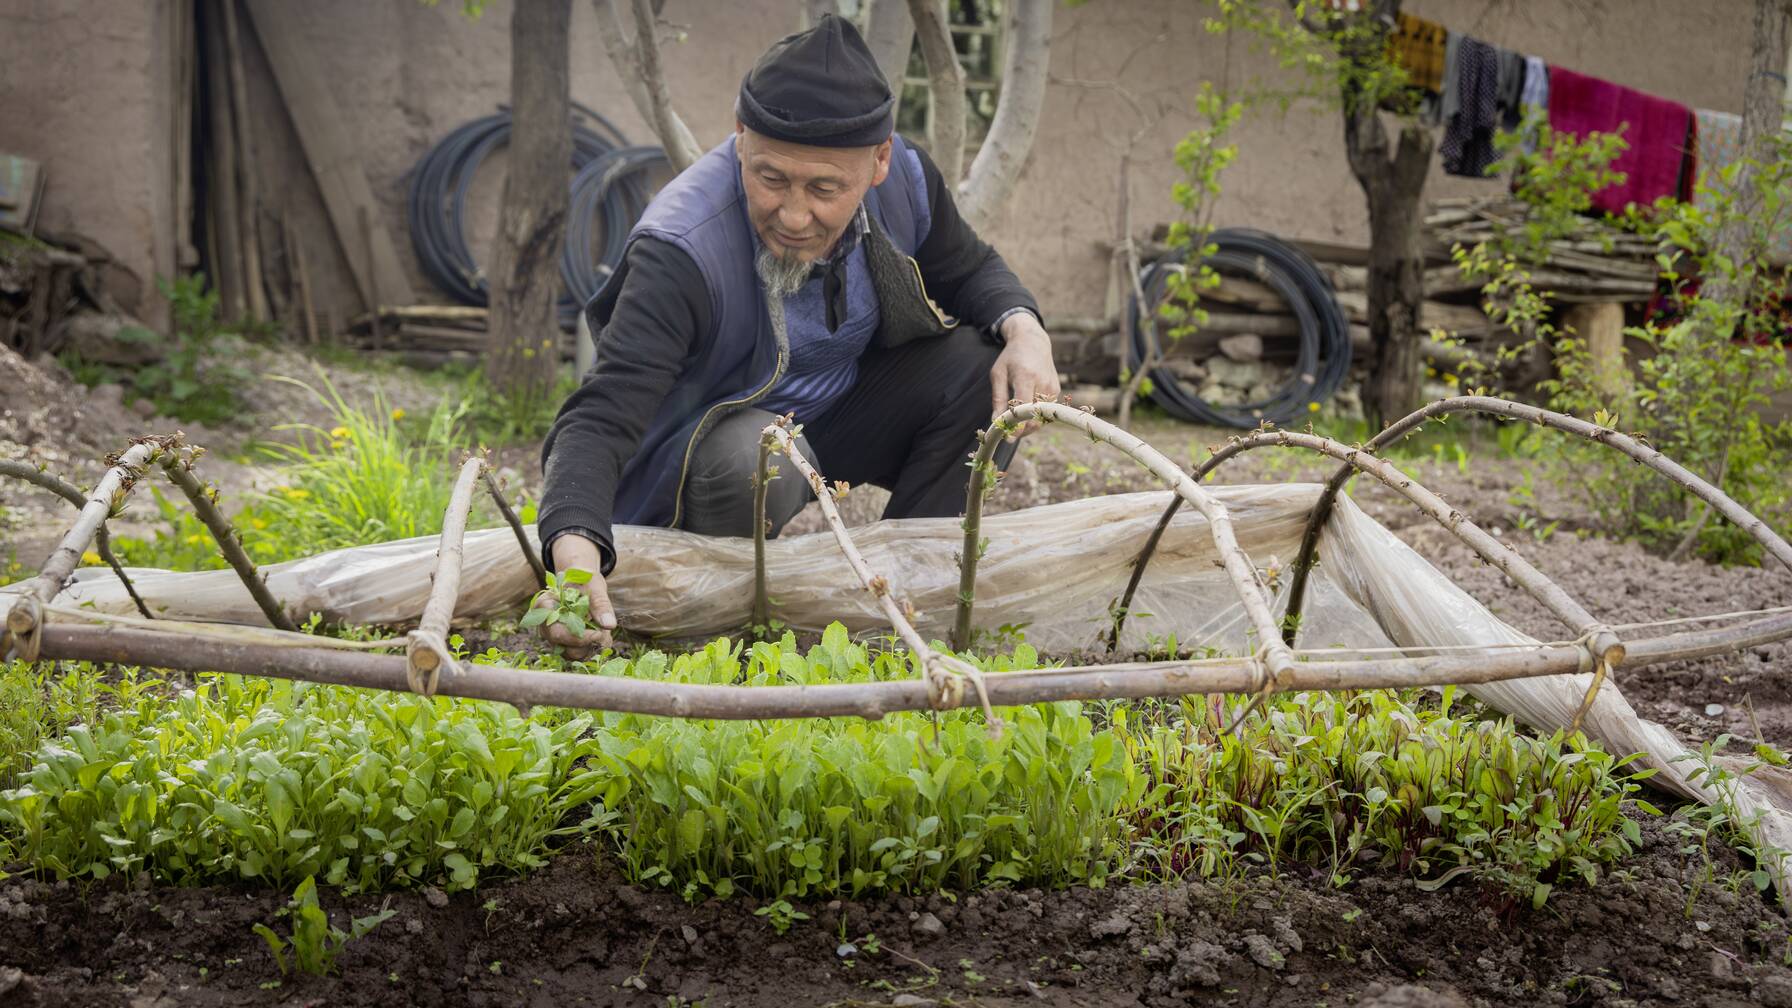 At home, Shokirjon Shamirov has his own garden. Thanks to Caritas, he now has a lot of knowledge and can grow a wide variety of vegetables, herbs and fruit.